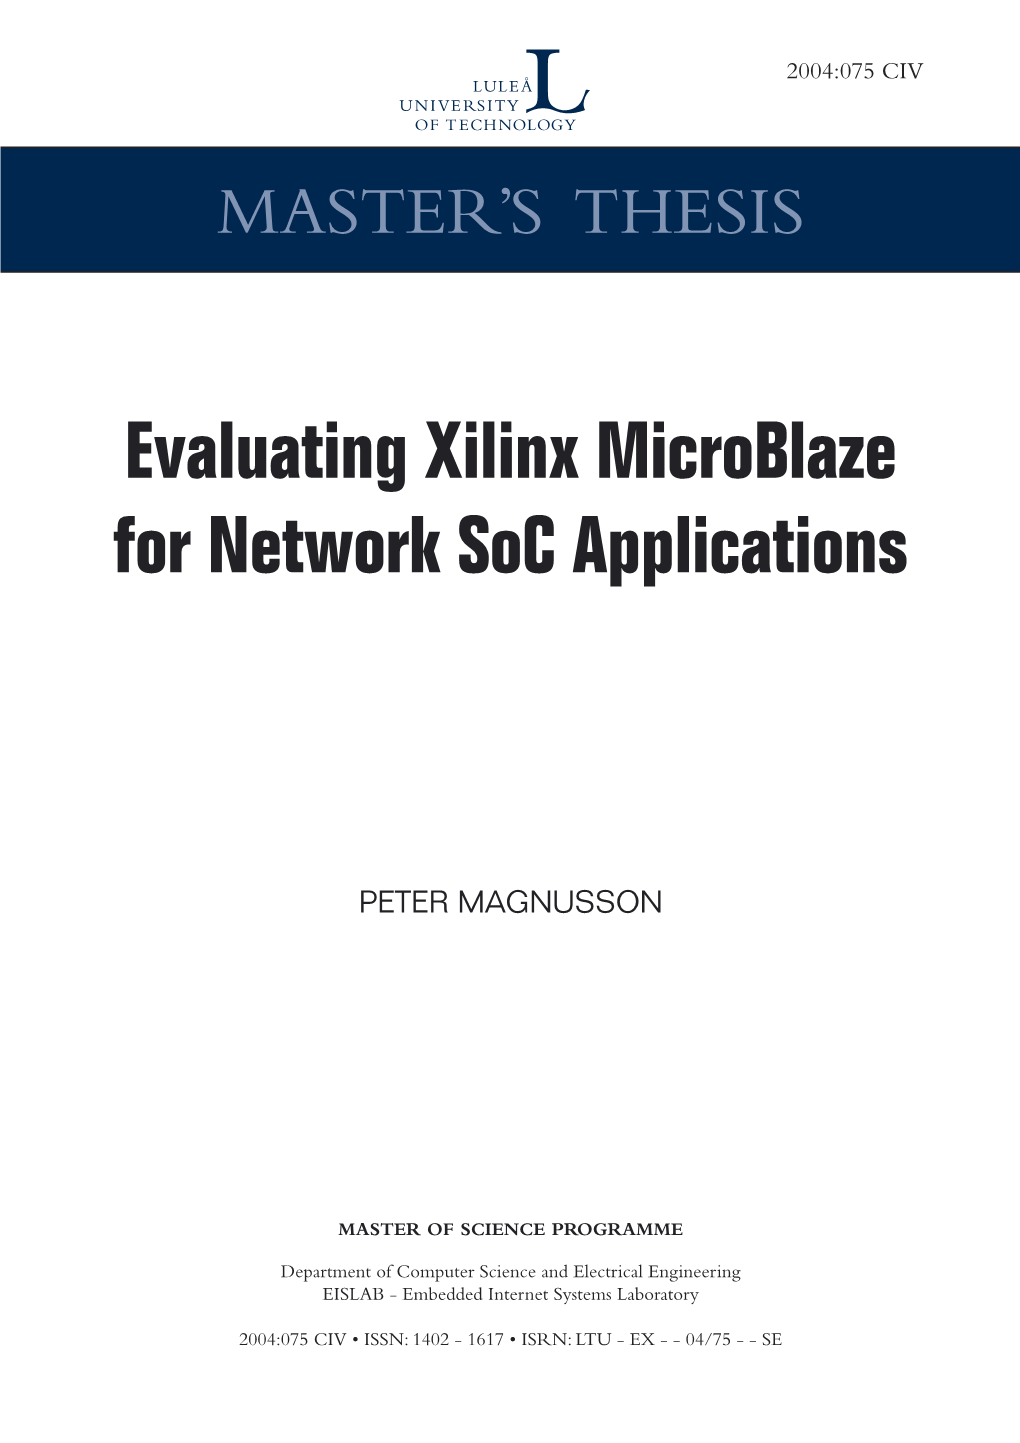 Evaluating Xilinx Microblaze for Network Soc Applications